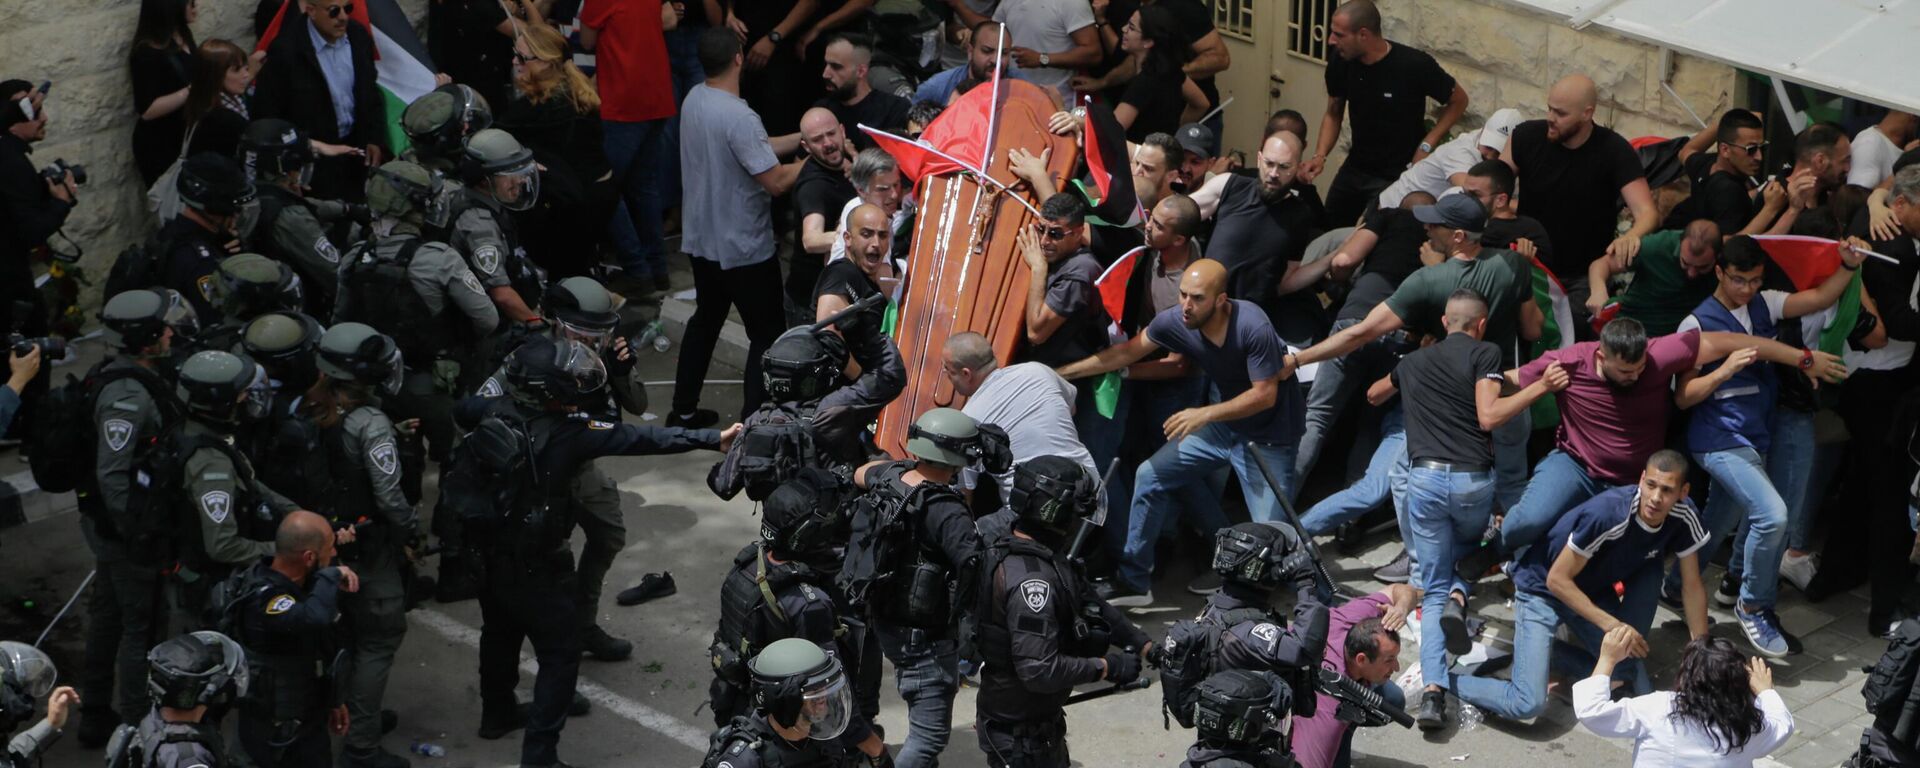 Israeli police confront with mourners as they carry the casket of slain Al Jazeera veteran journalist Shireen Abu Akleh during her funeral in east Jerusalem, Friday, May 13, 2022.  - Sputnik International, 1920, 16.05.2022